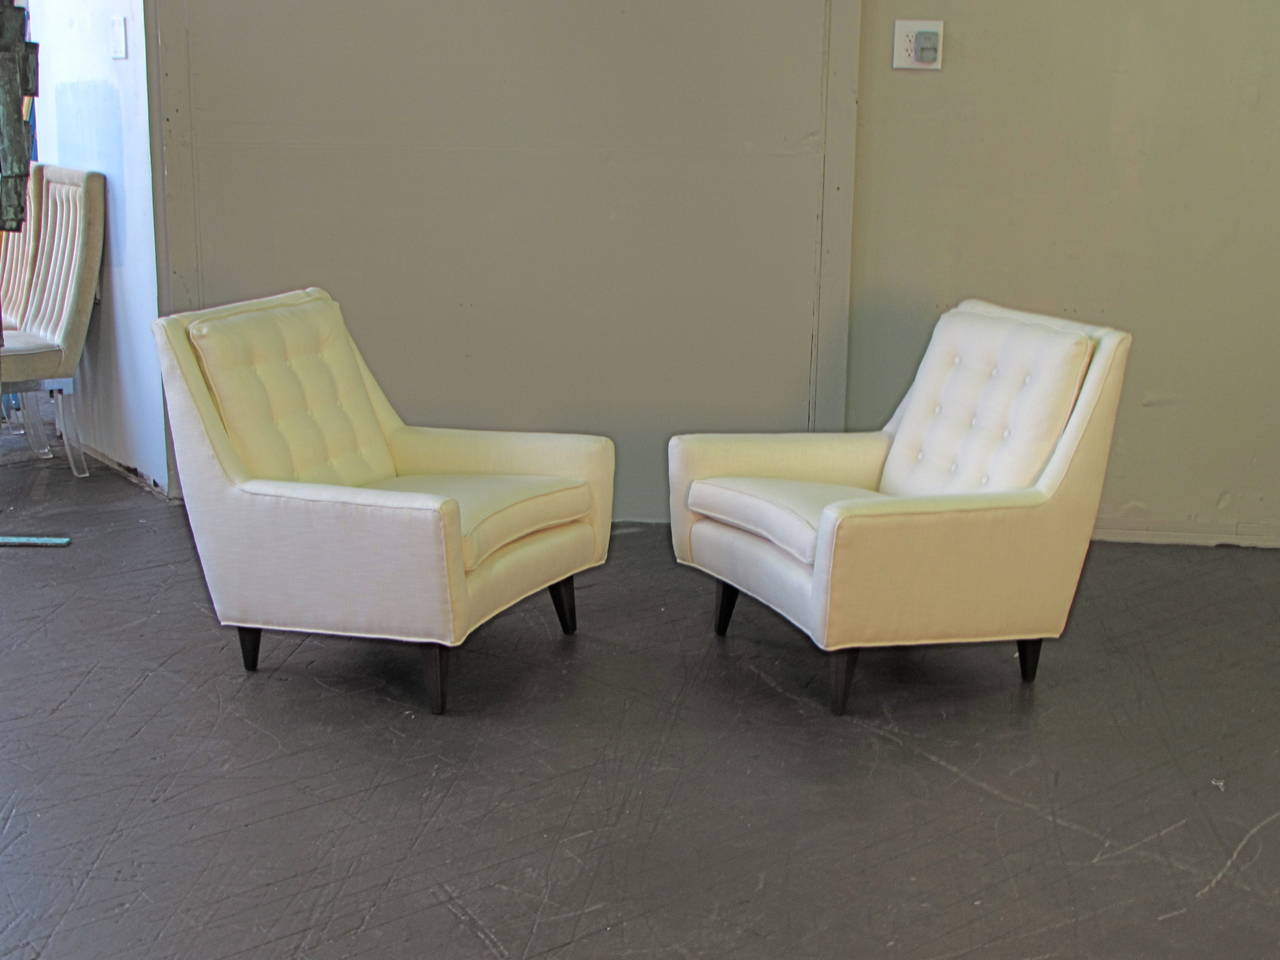 Classic Mid-Century Modern lounge chairs, circa 1950. These chairs are both sculptural and comfortable. Seat fronts and head rest have a beautiful curved detail. The clean, simple lines allow these chairs to work in any room. Upholstery is new.